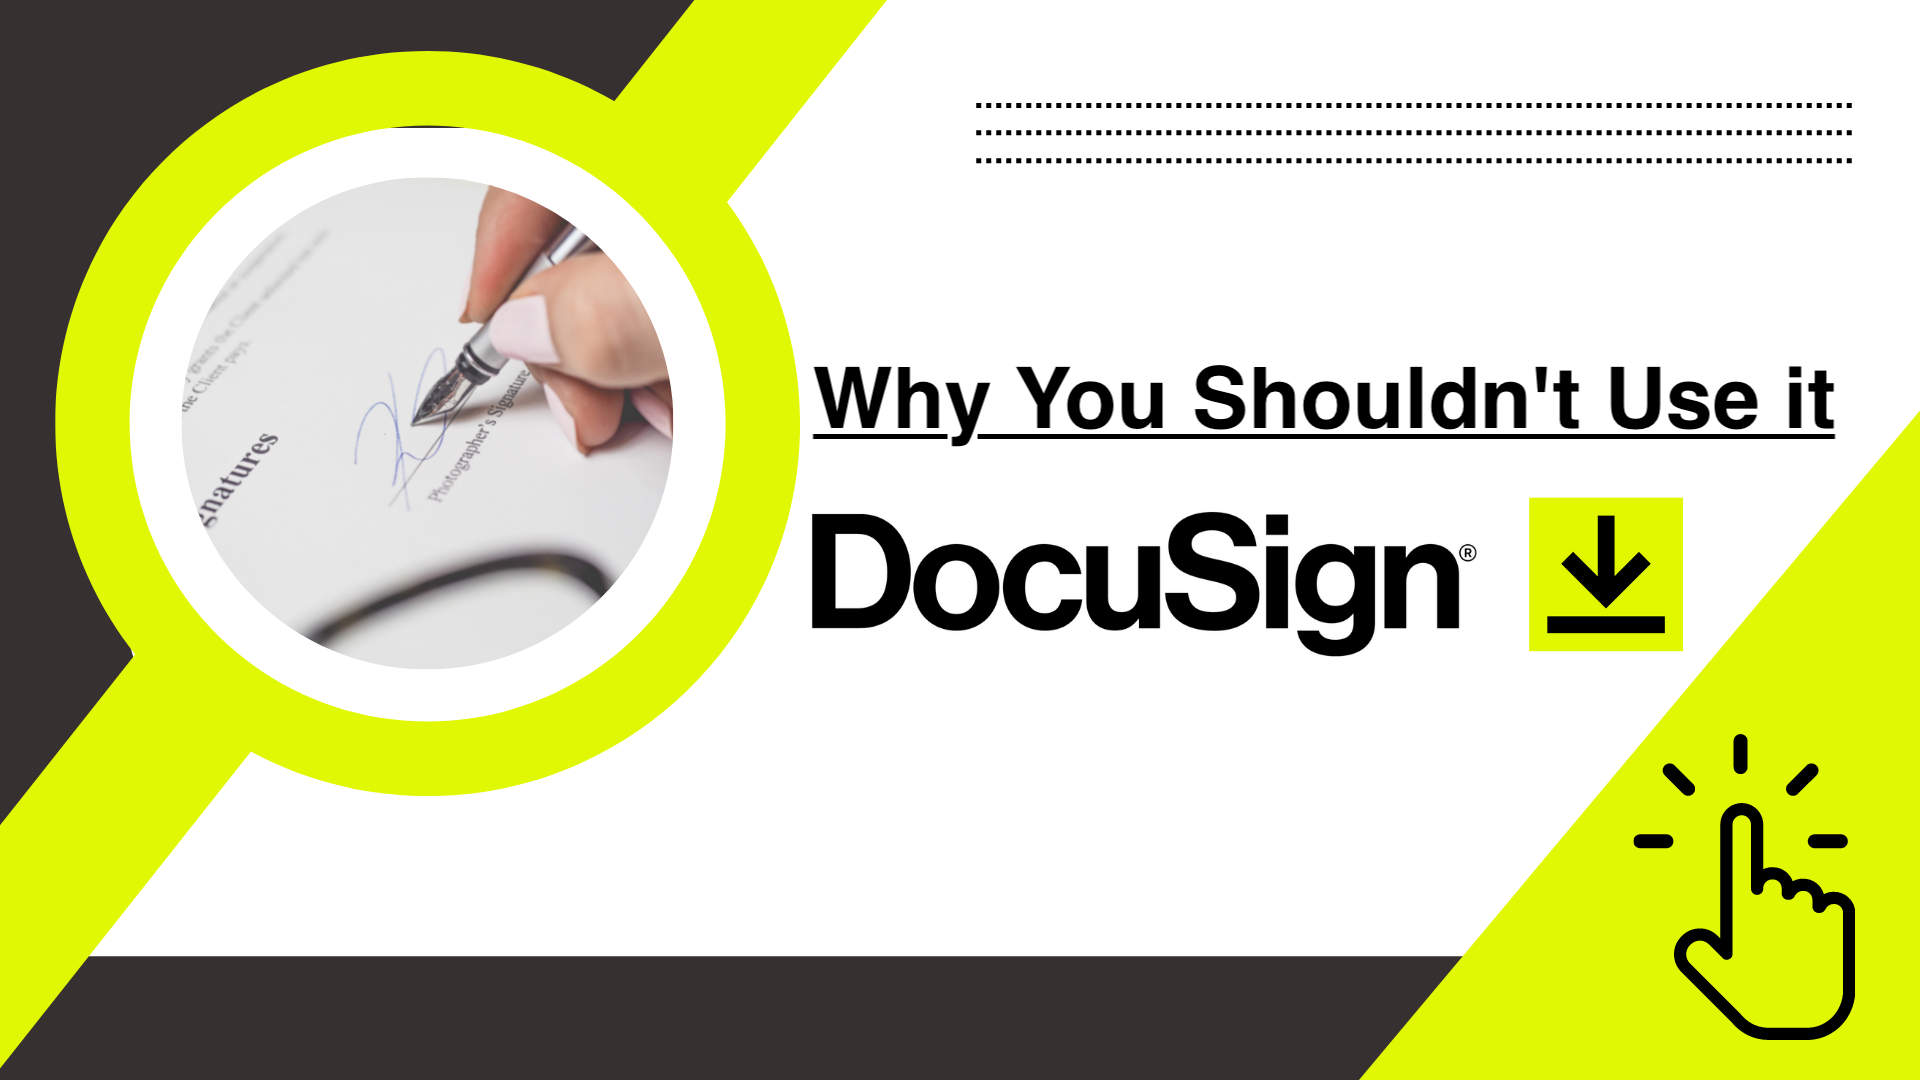 10 Reasons Why You Shouldn’t Use DocuSign